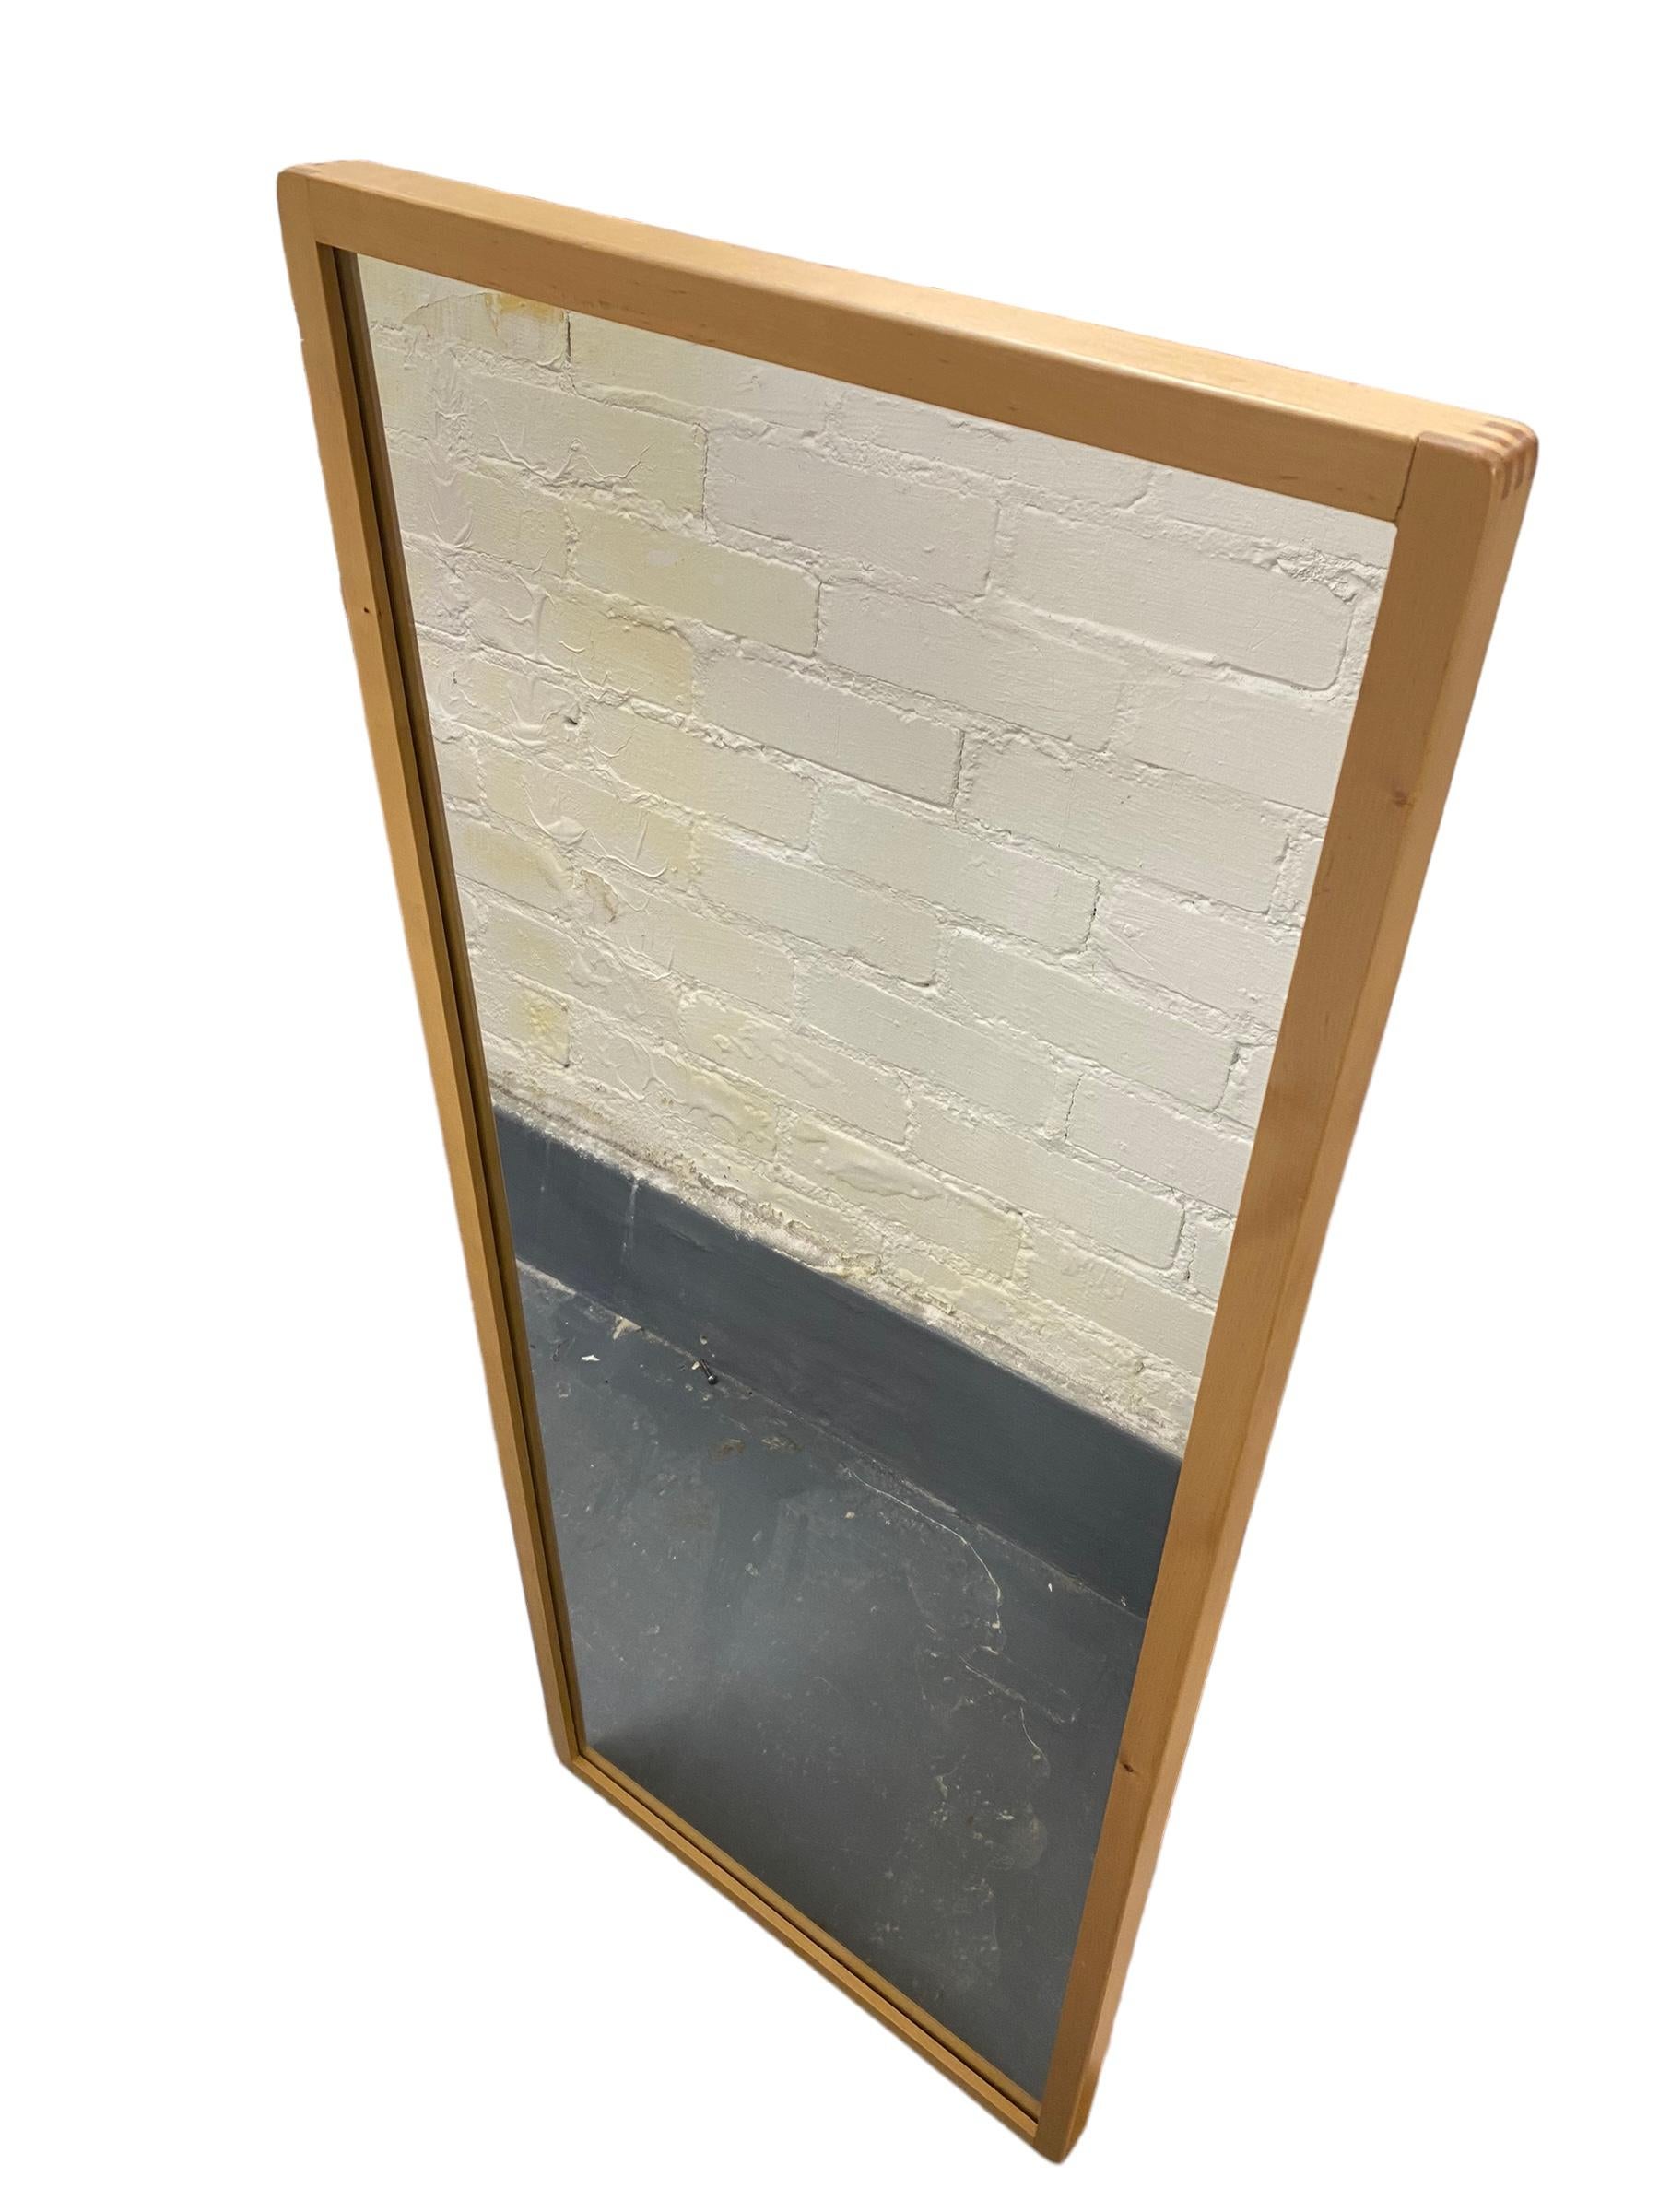 An iconic mirror designed by Alvar Aalto and retailed by Artek in Finland.  We have seen this type mirror in schools, public buildings, kintergardens, restaurants, and you name it, and it´s there.  

This mirror makes a great addition to any space,